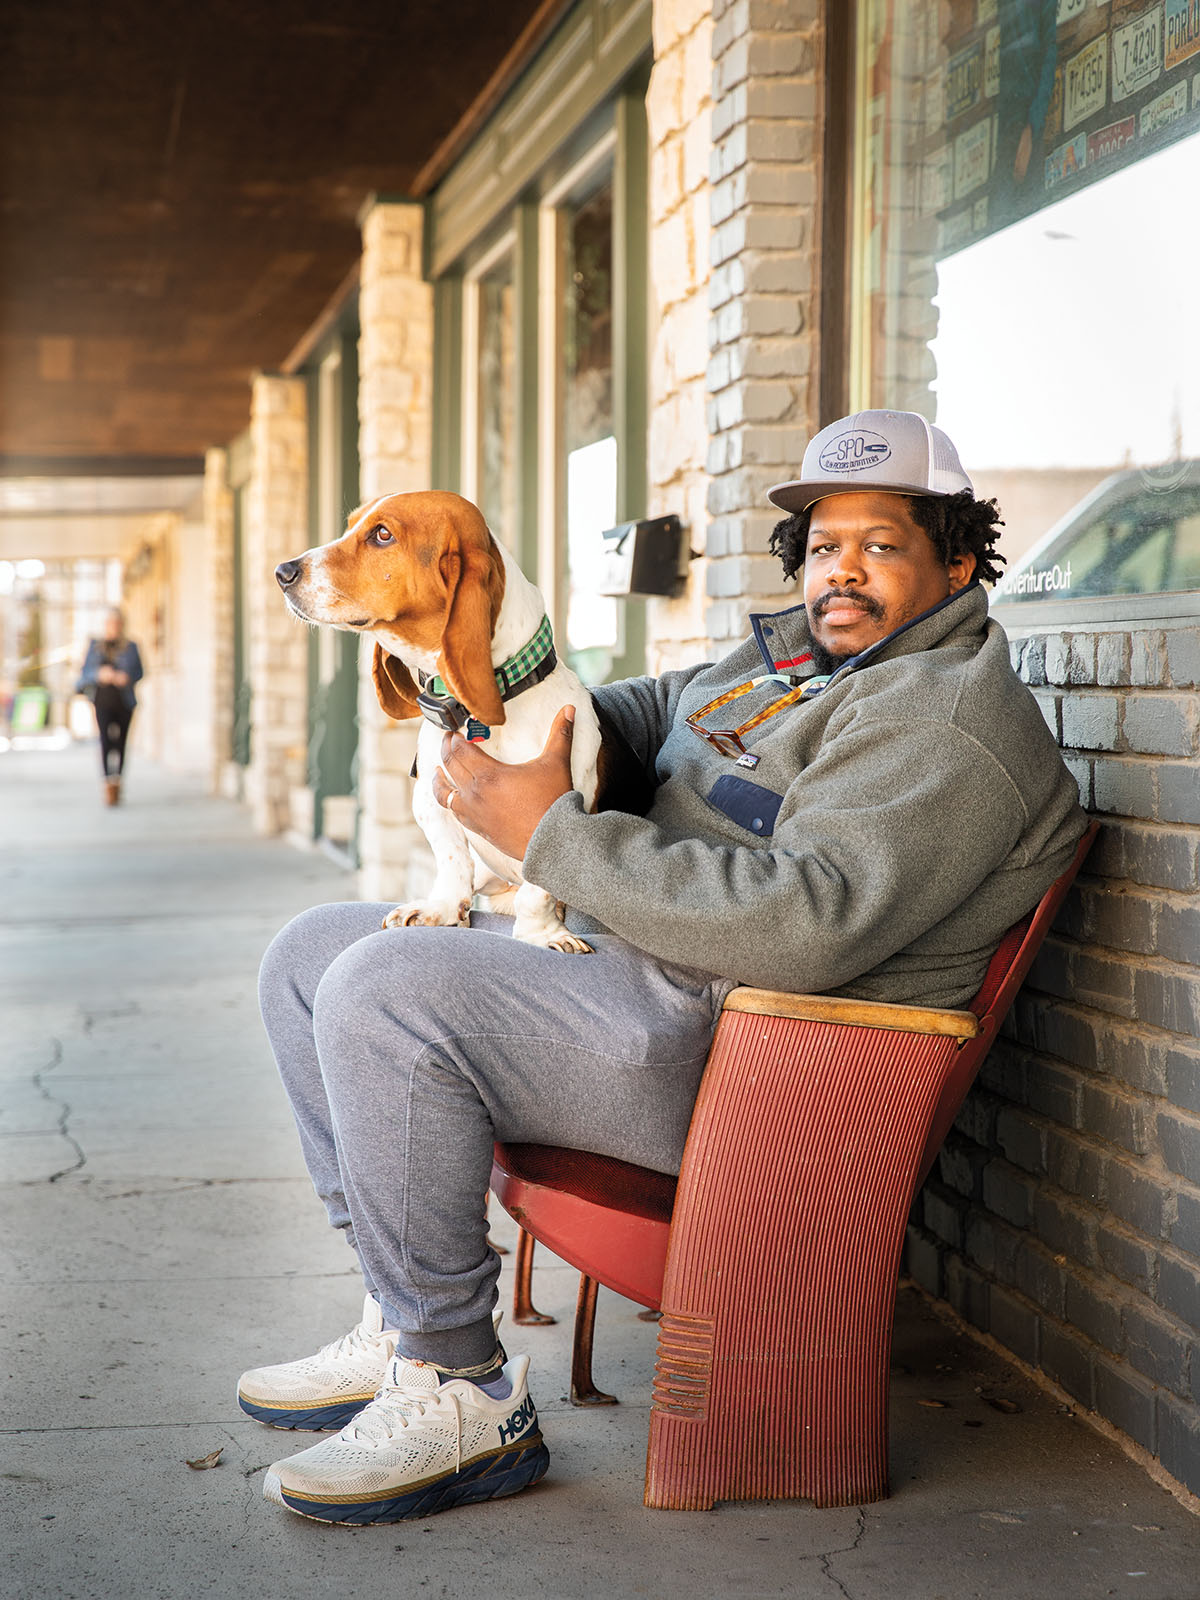 A man in a fleece jacket and gray pants sits in a chair with a dog in his lap